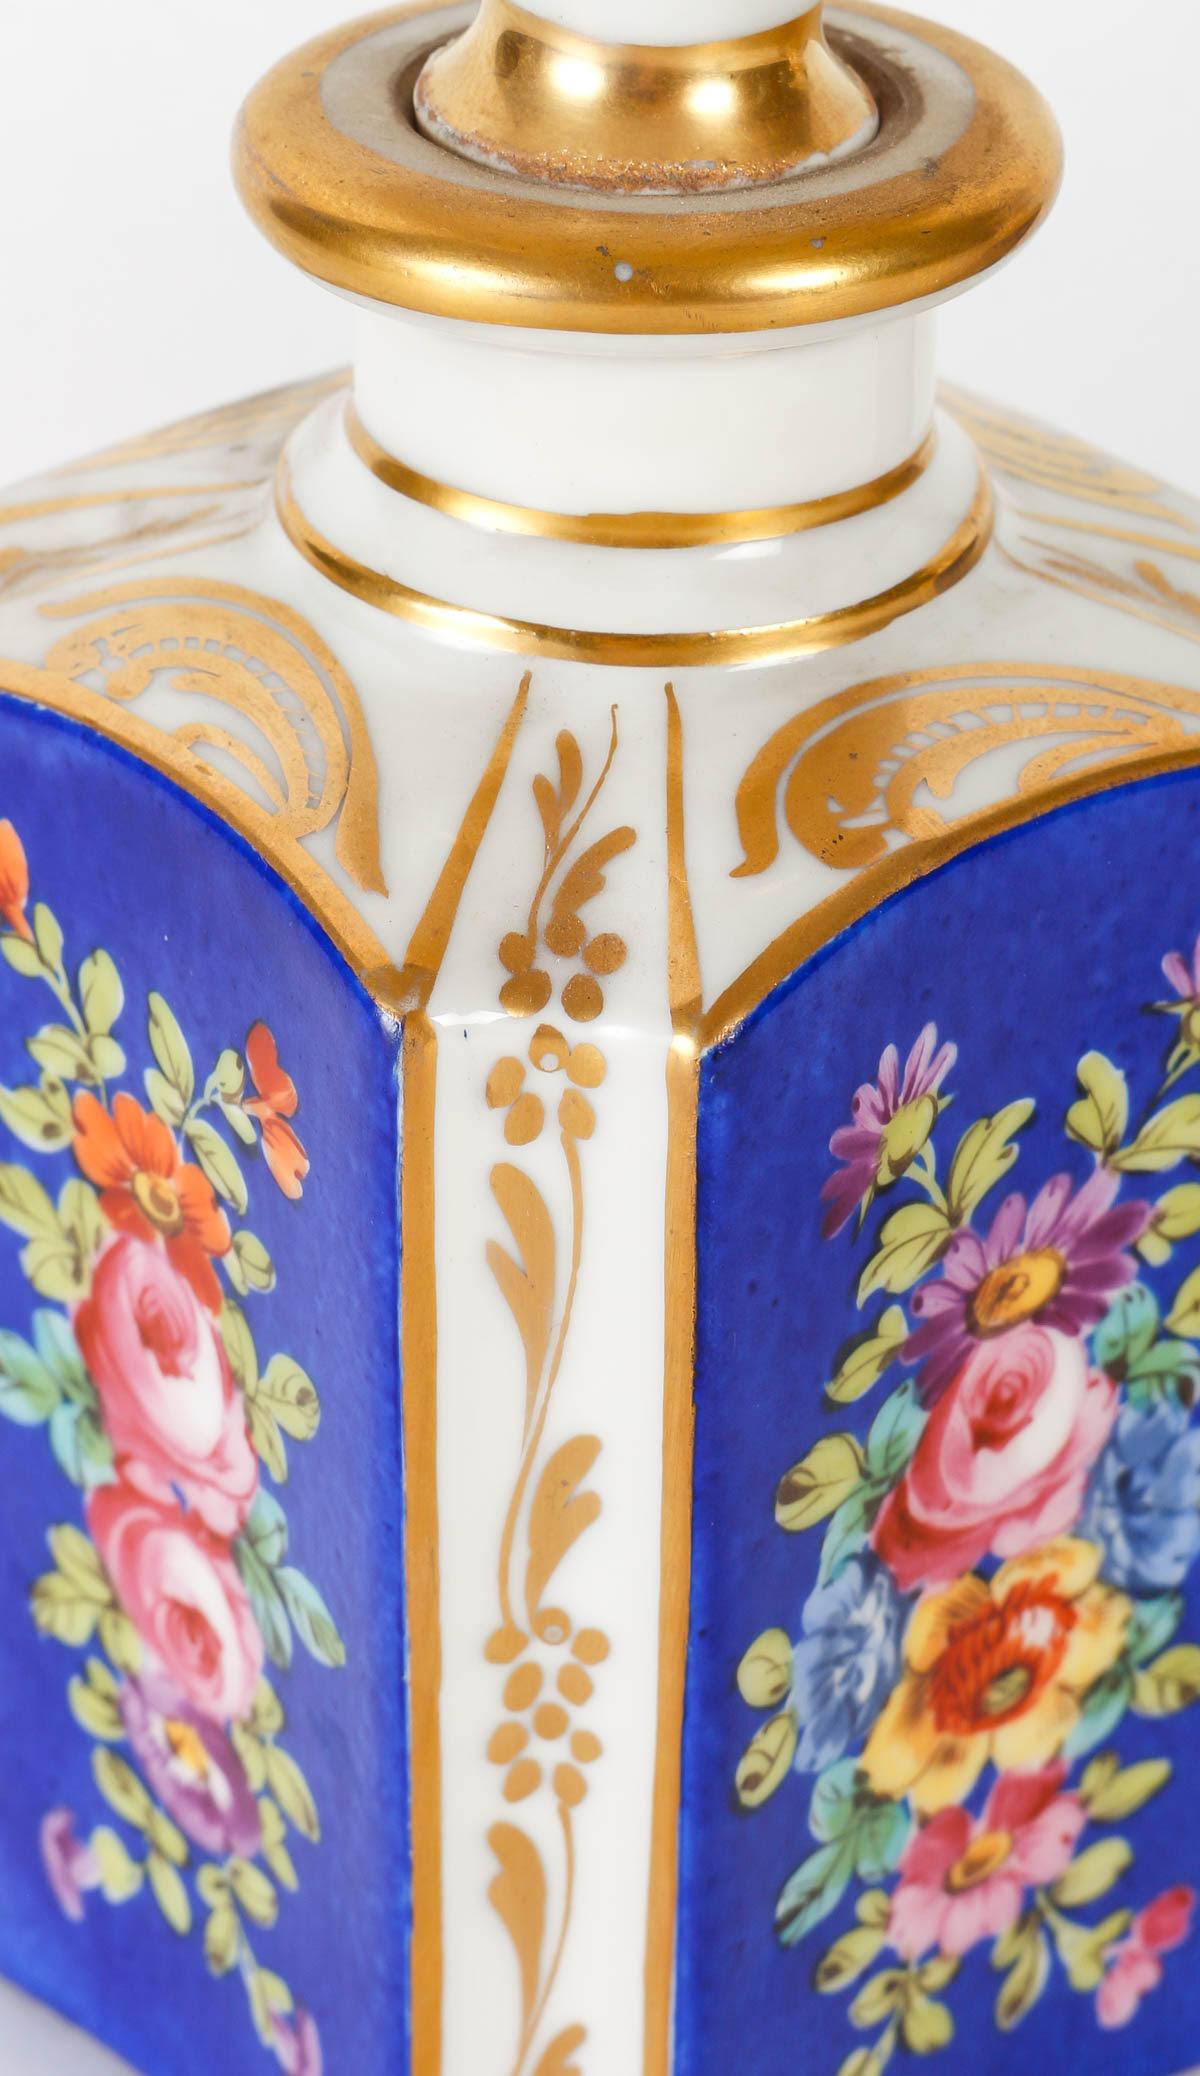 Pair of gilded and hand-painted porcelain flasks, Napoleon III period.

Pair of 19th century porcelain flasks with their stoppers, hand-painted and gilded decoration, Napoleon III period.

Dimensions: h: 16cm, w: 7cm, d: 7cm